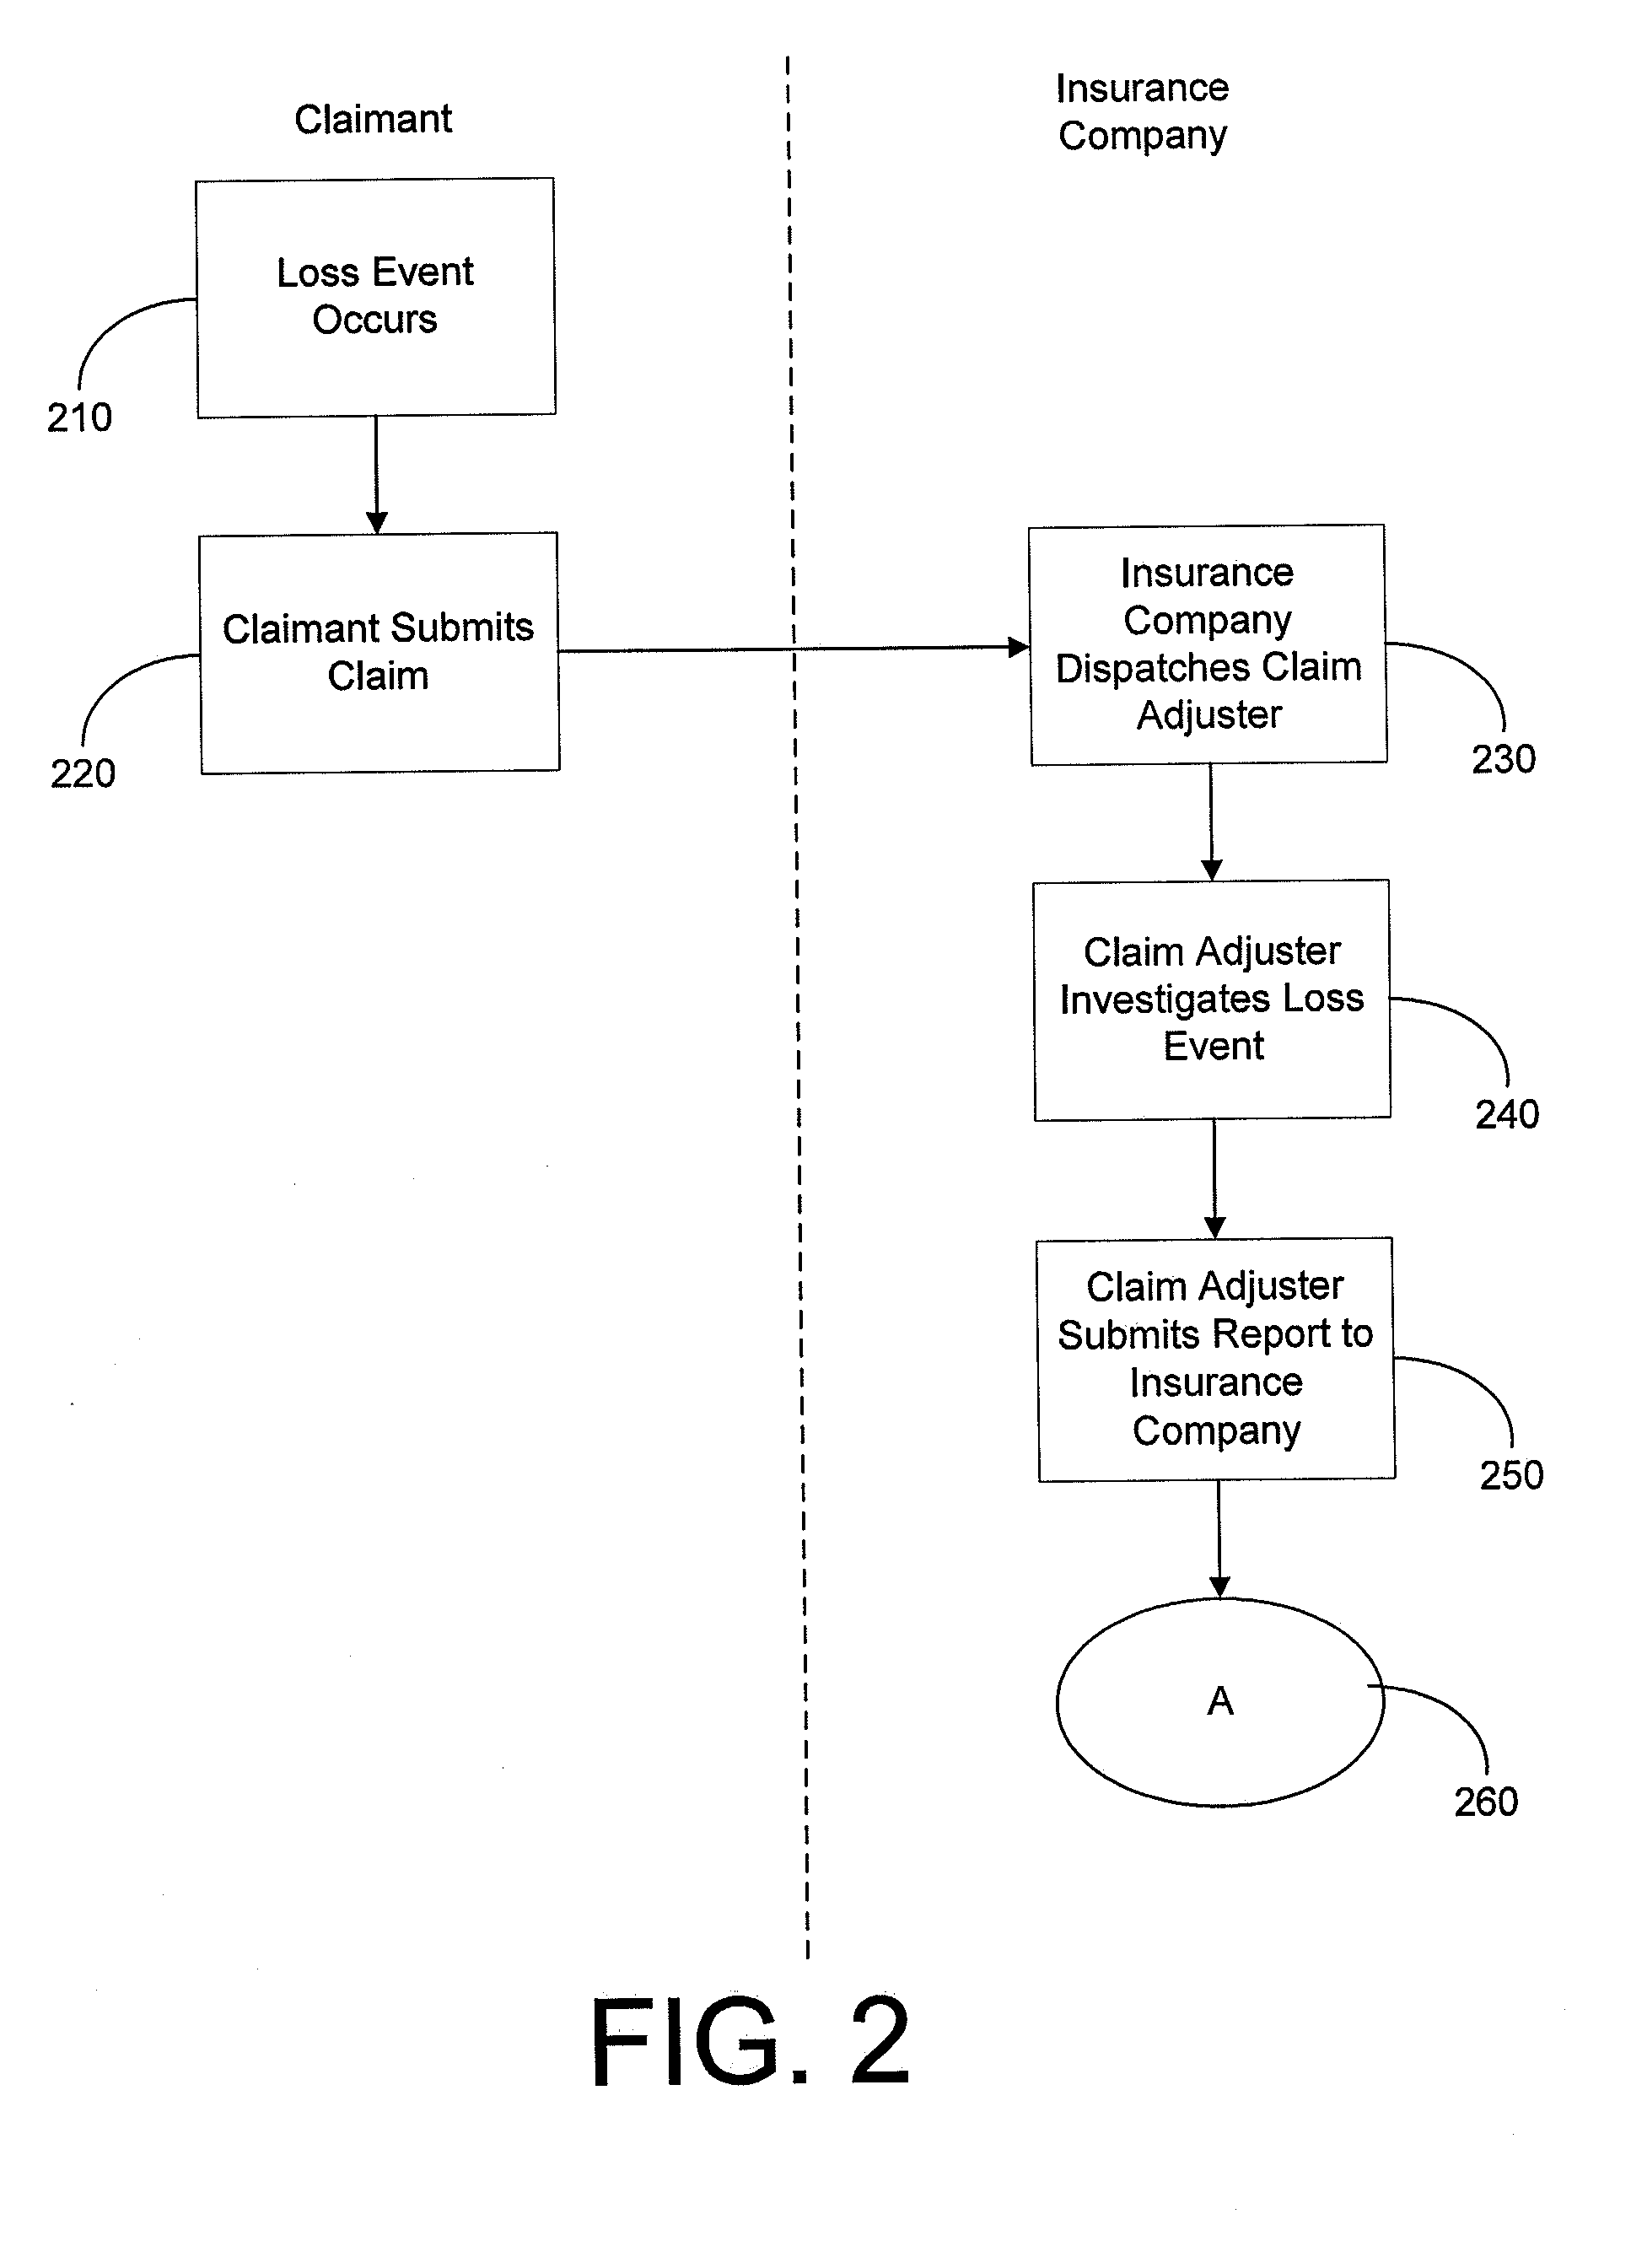 System and method for managing a business process and business process content